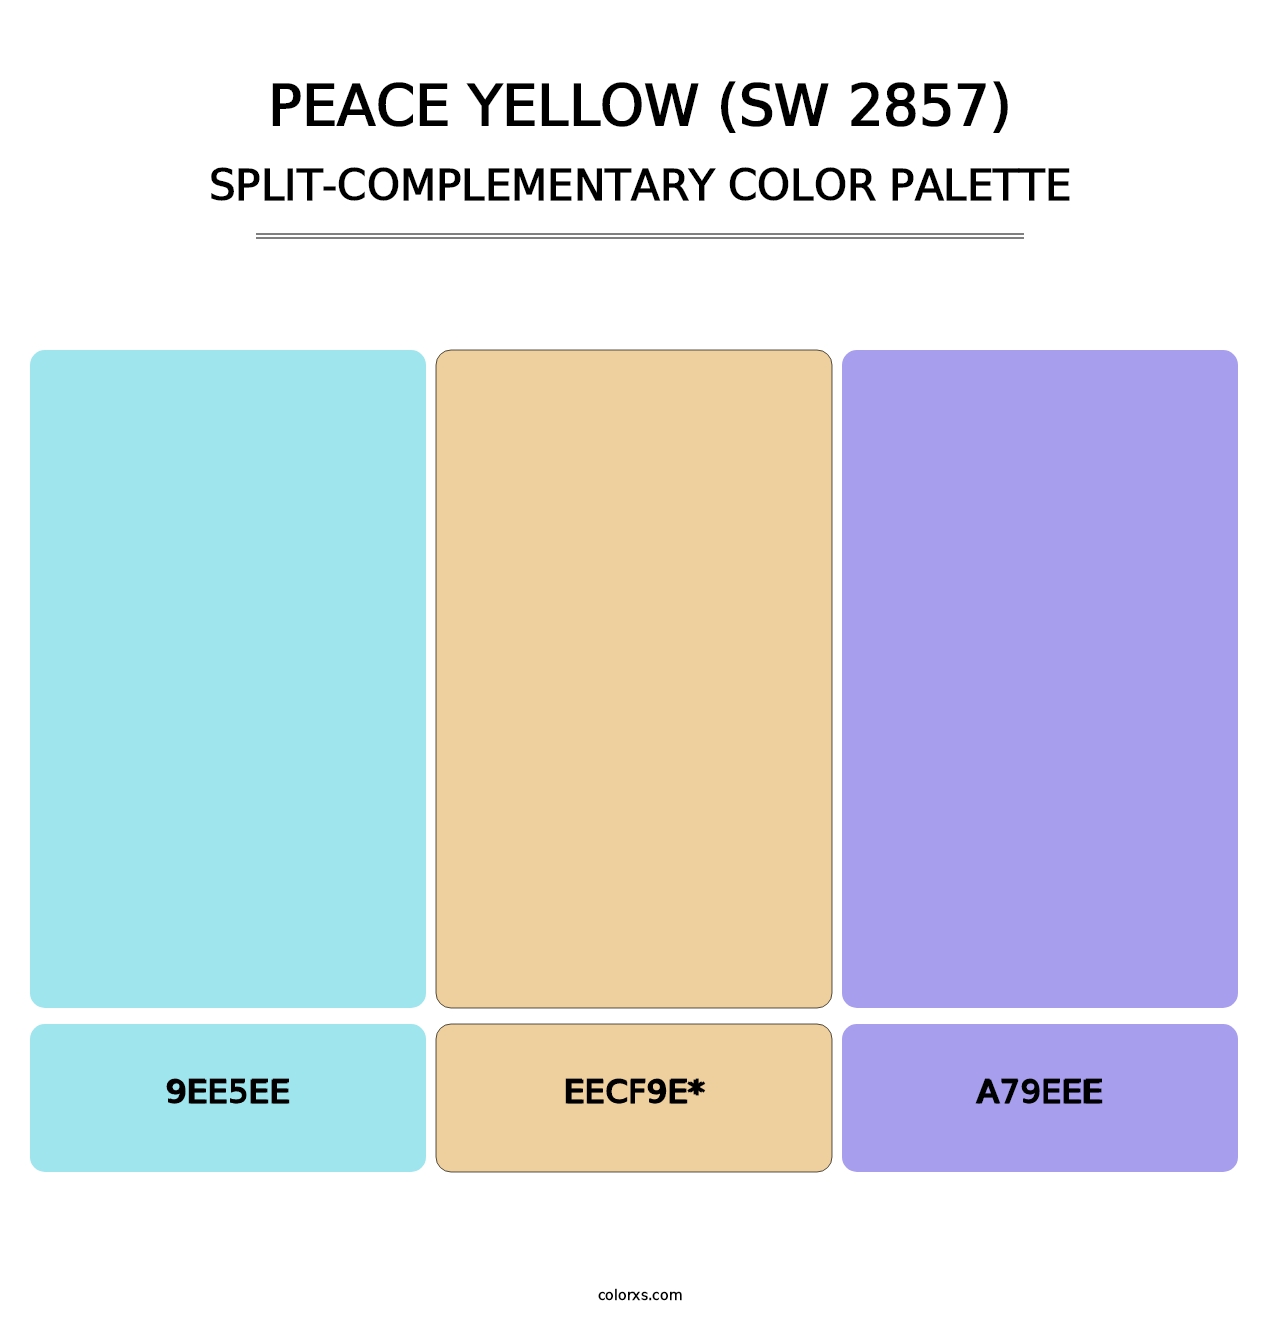 Peace Yellow (SW 2857) - Split-Complementary Color Palette